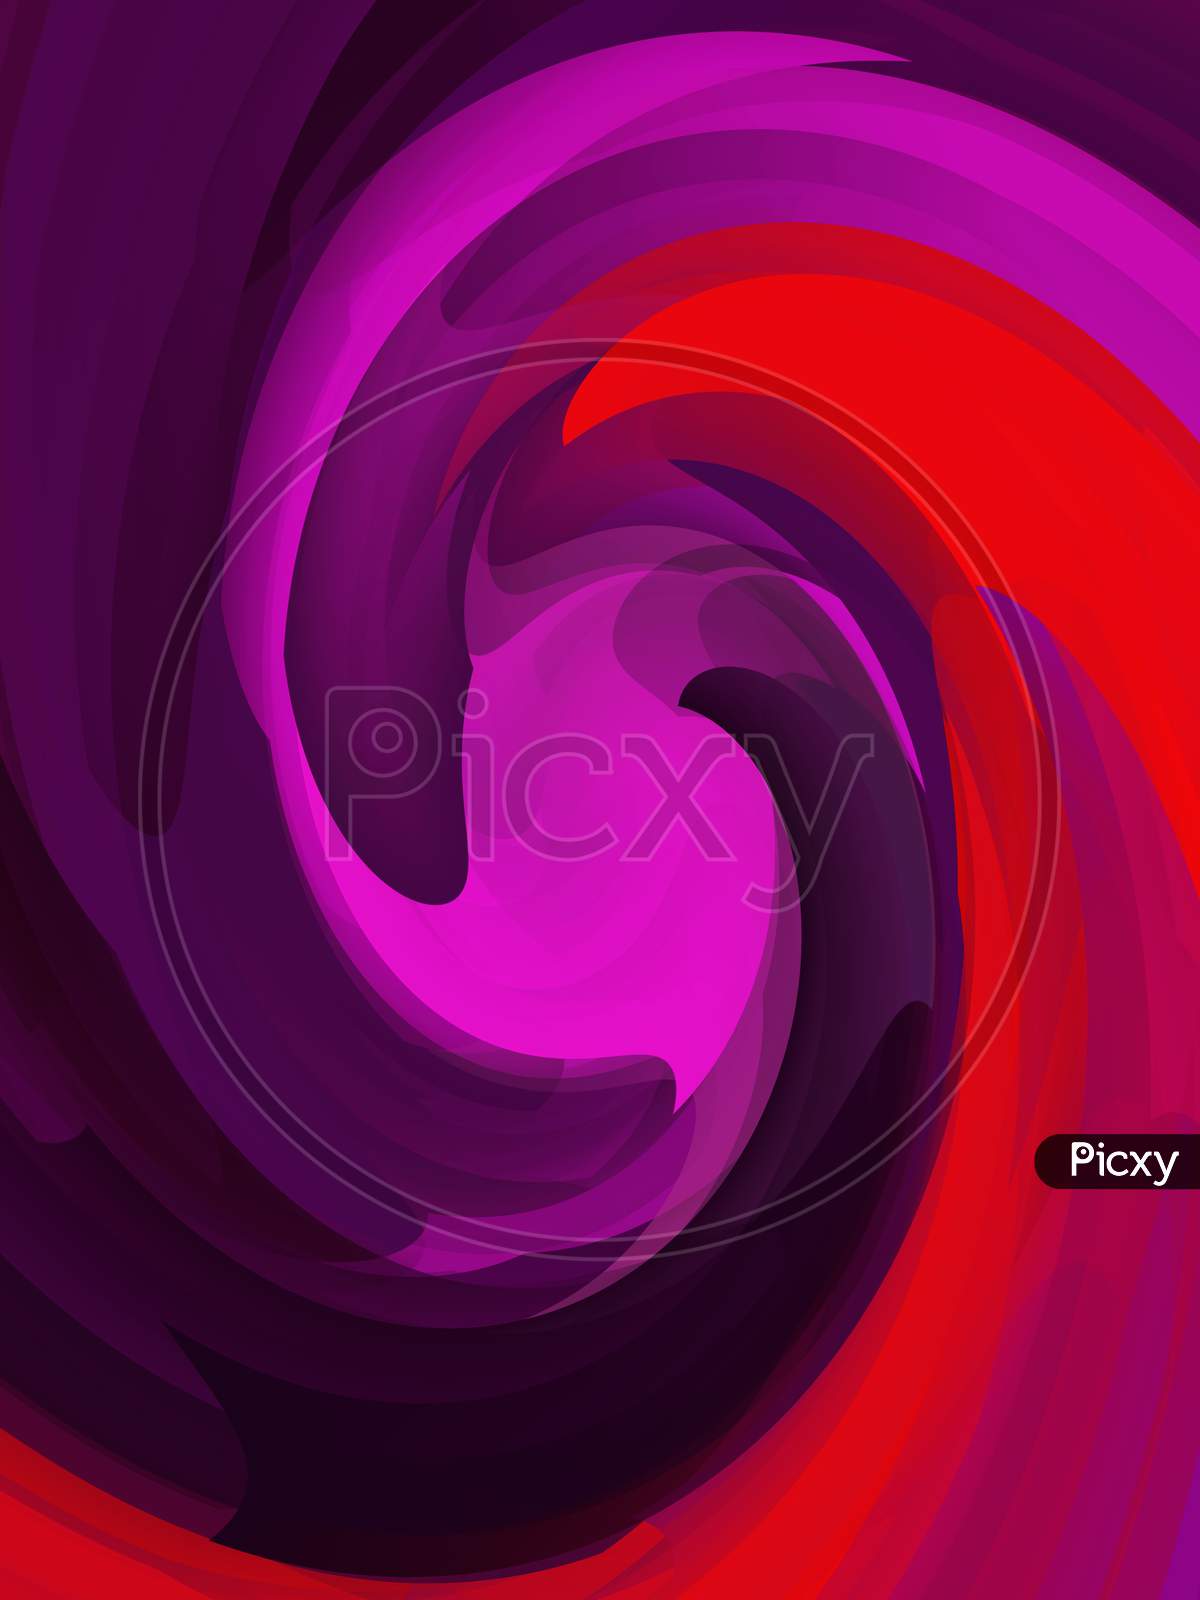 Rounding Frame Purple And Red Art Texture Raster Image Digital Creation Graphic Vector Abstract.